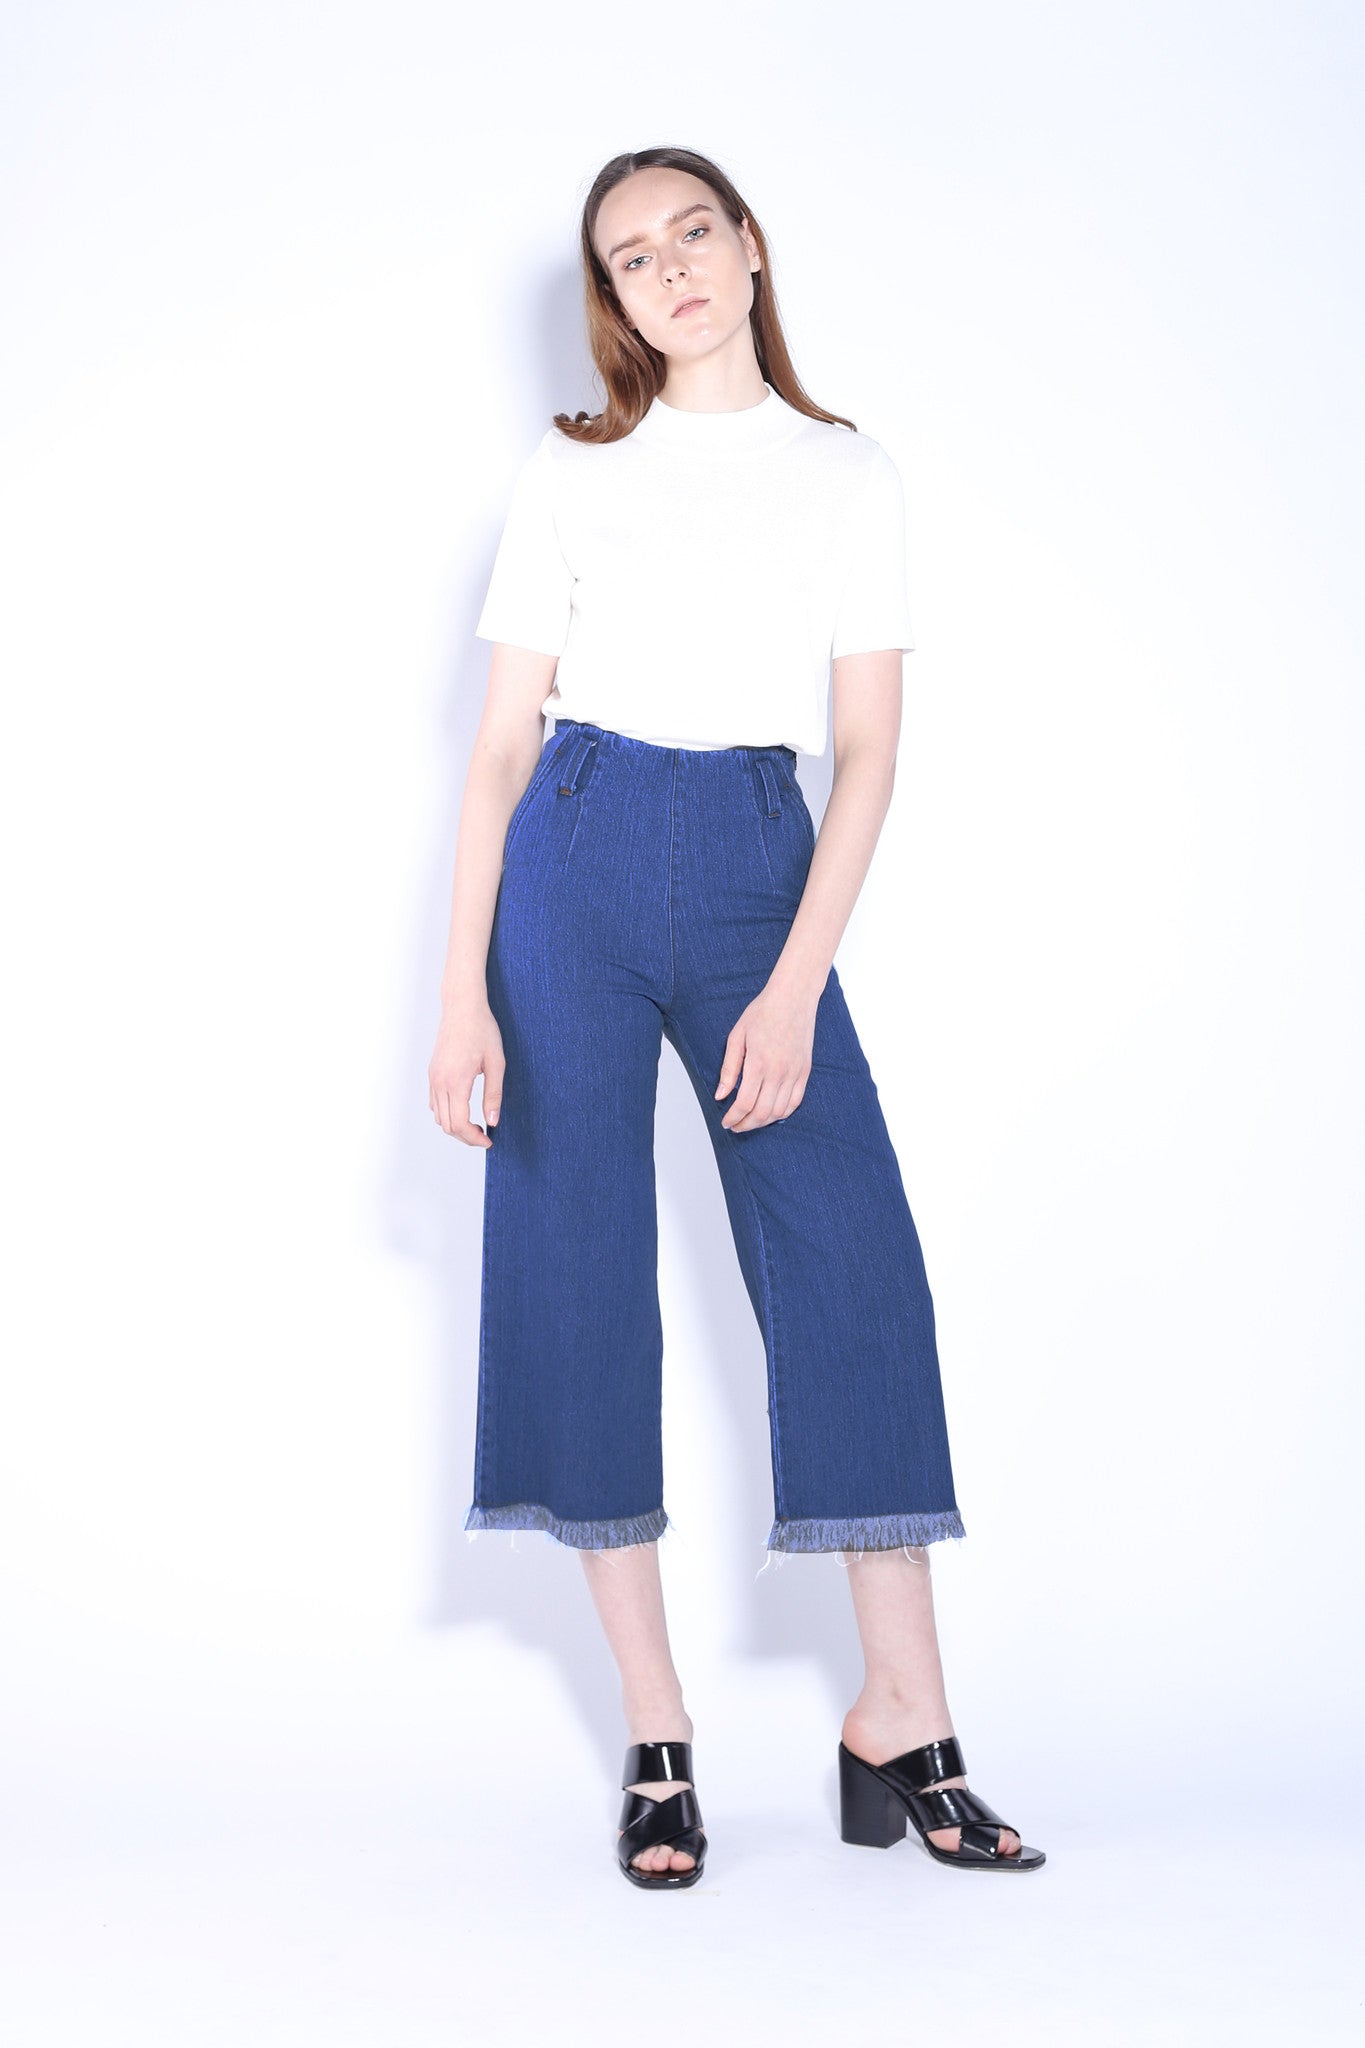 high waisted culotte jeans